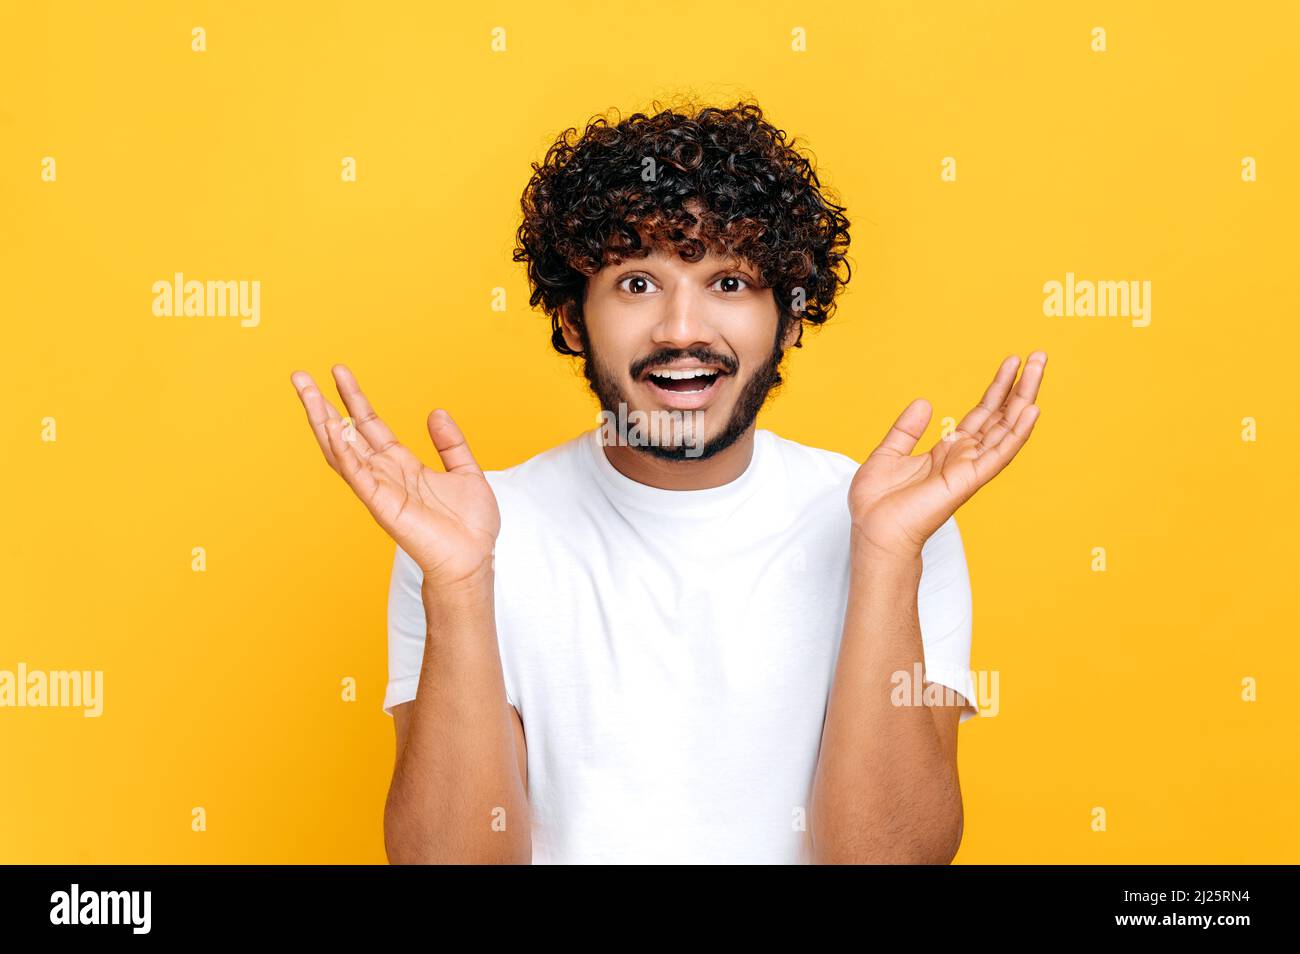 Surprised confused indian or arabian guy with curly hair, wearing white t-shirt, looking at camera in disbelief, spreading his arms to the sides, shrugging, standing over isolated orange background Stock Photo